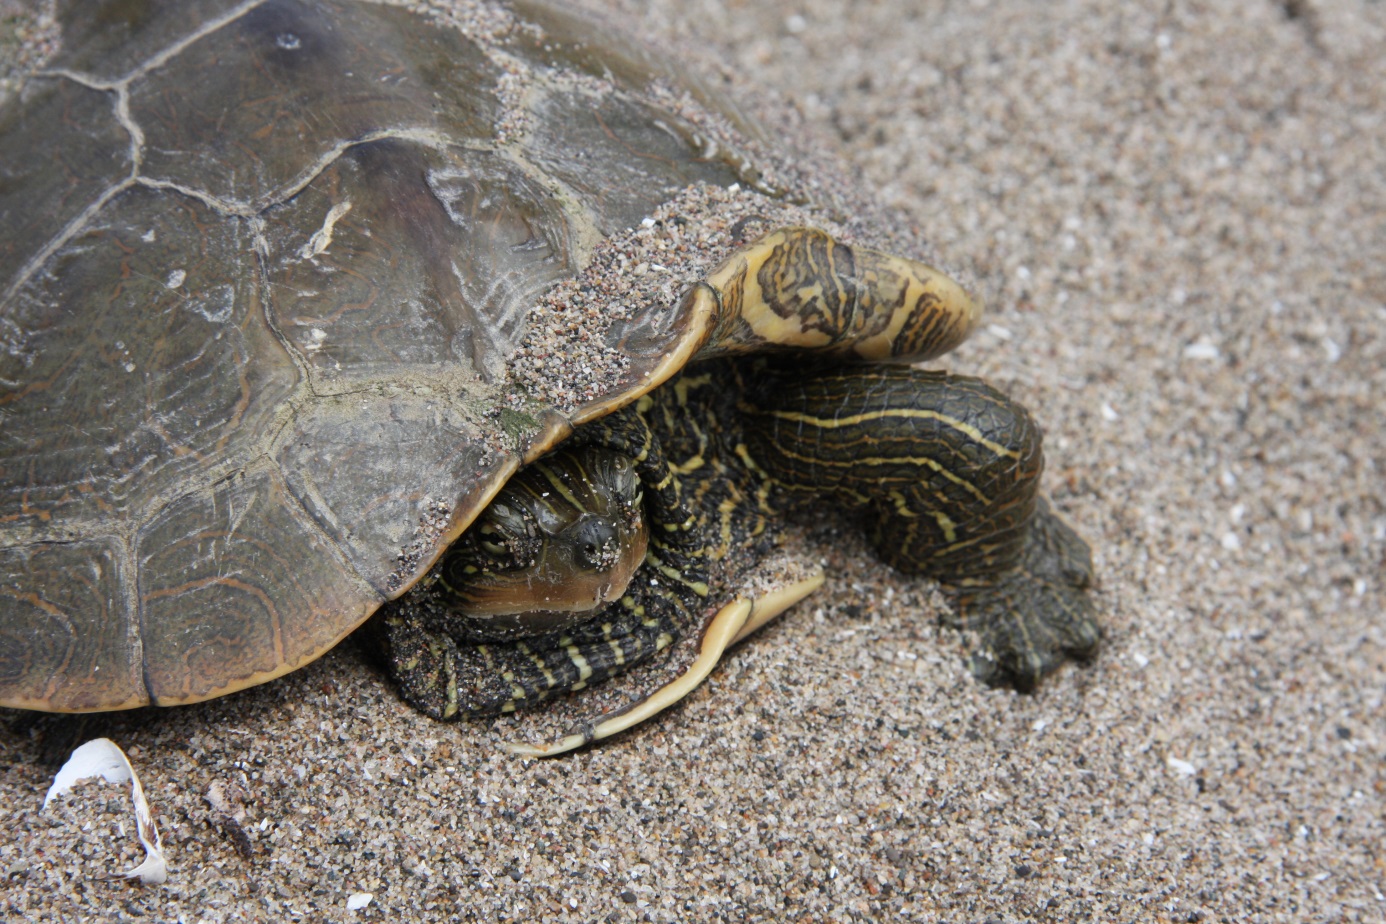 Northern map turtle (Graptemys geographica) on the beach of Lake Pond.